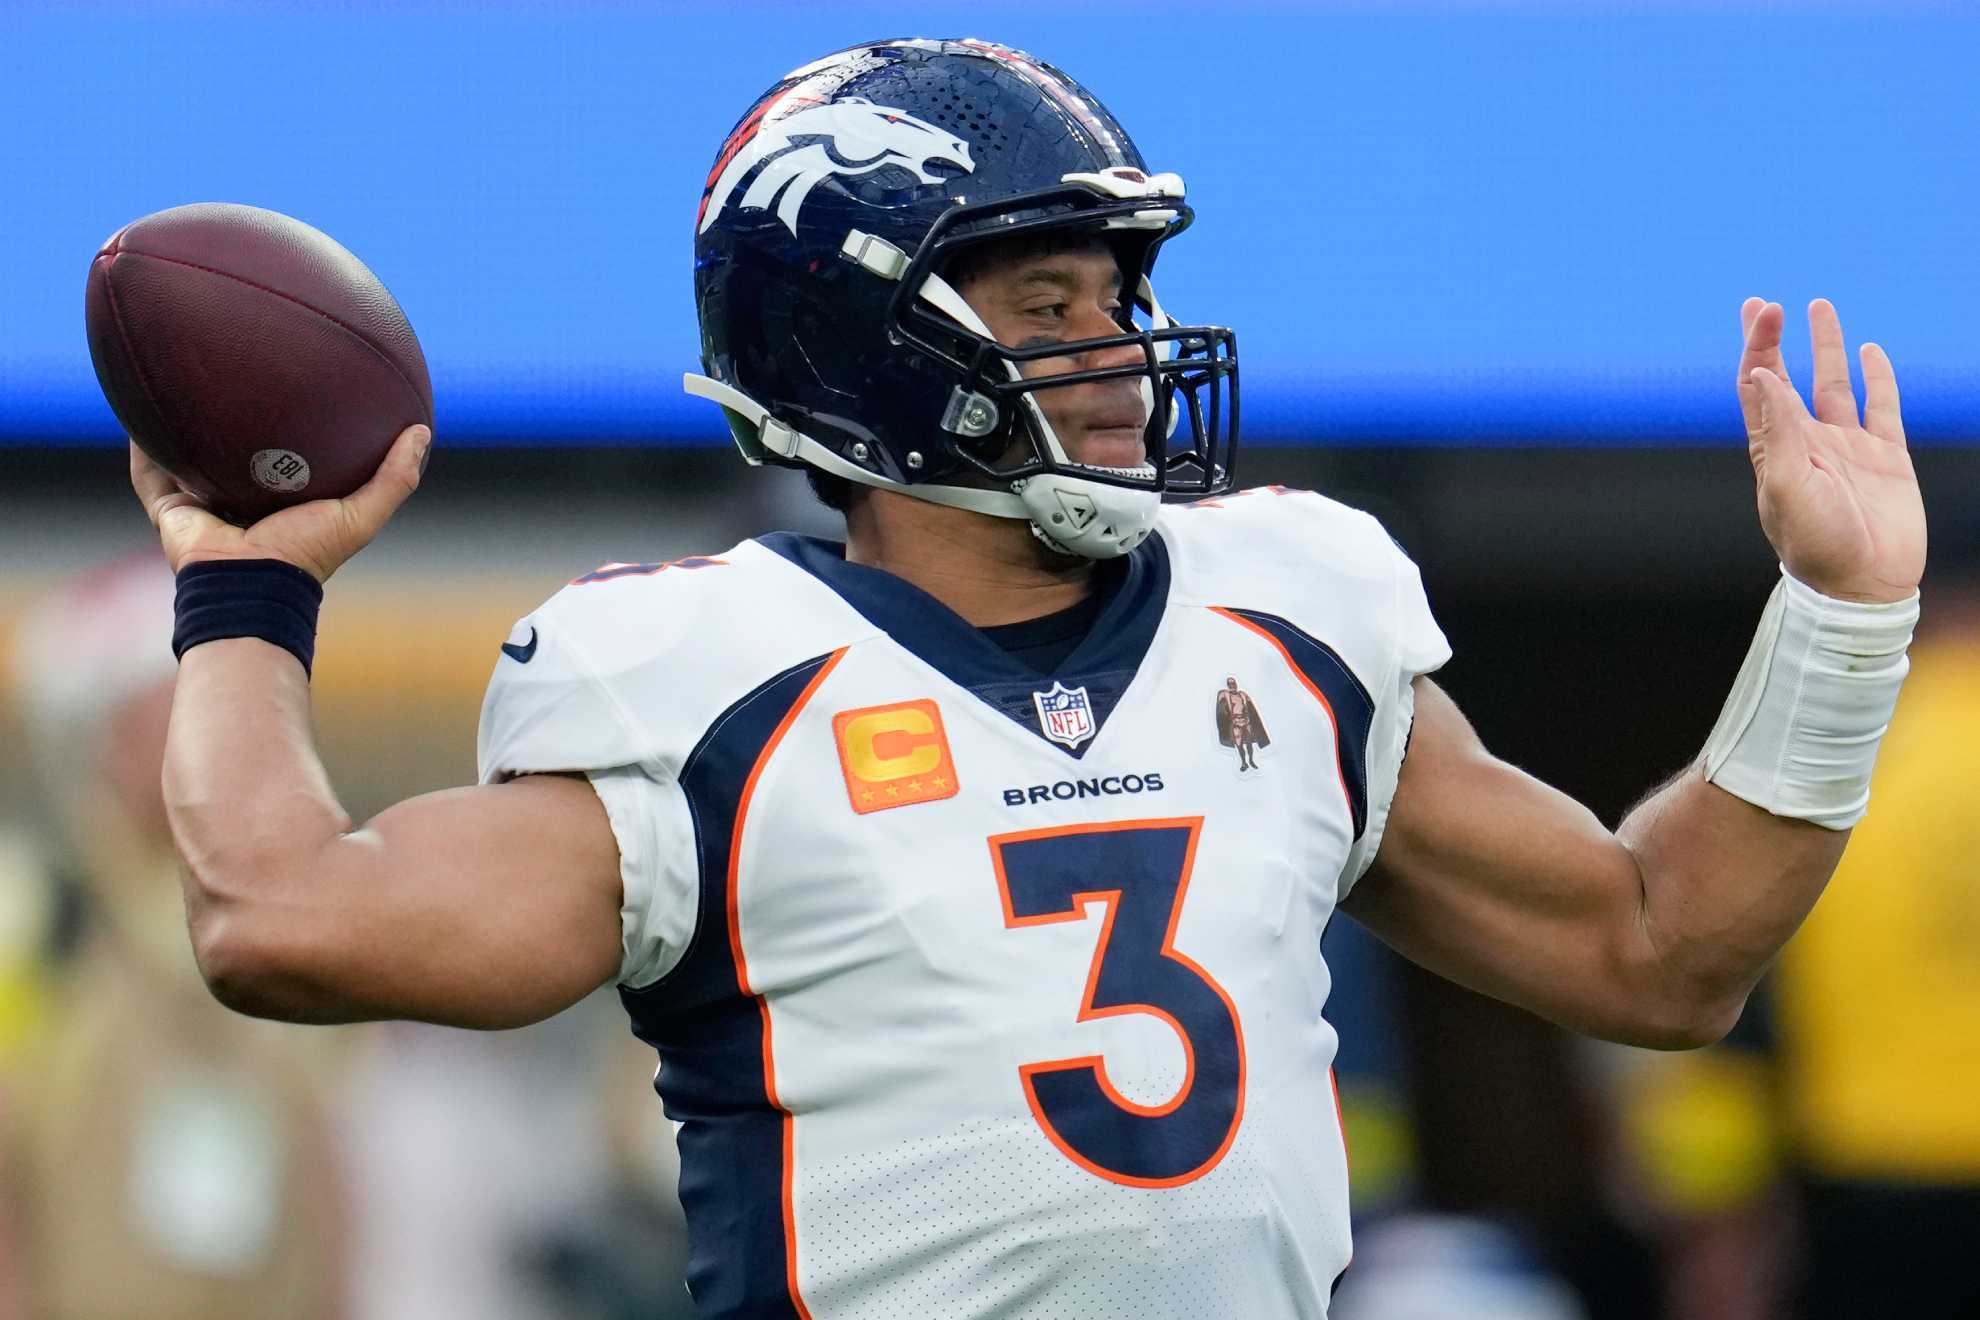 Russell Wilson amid claims and fights with teammates, Broncos